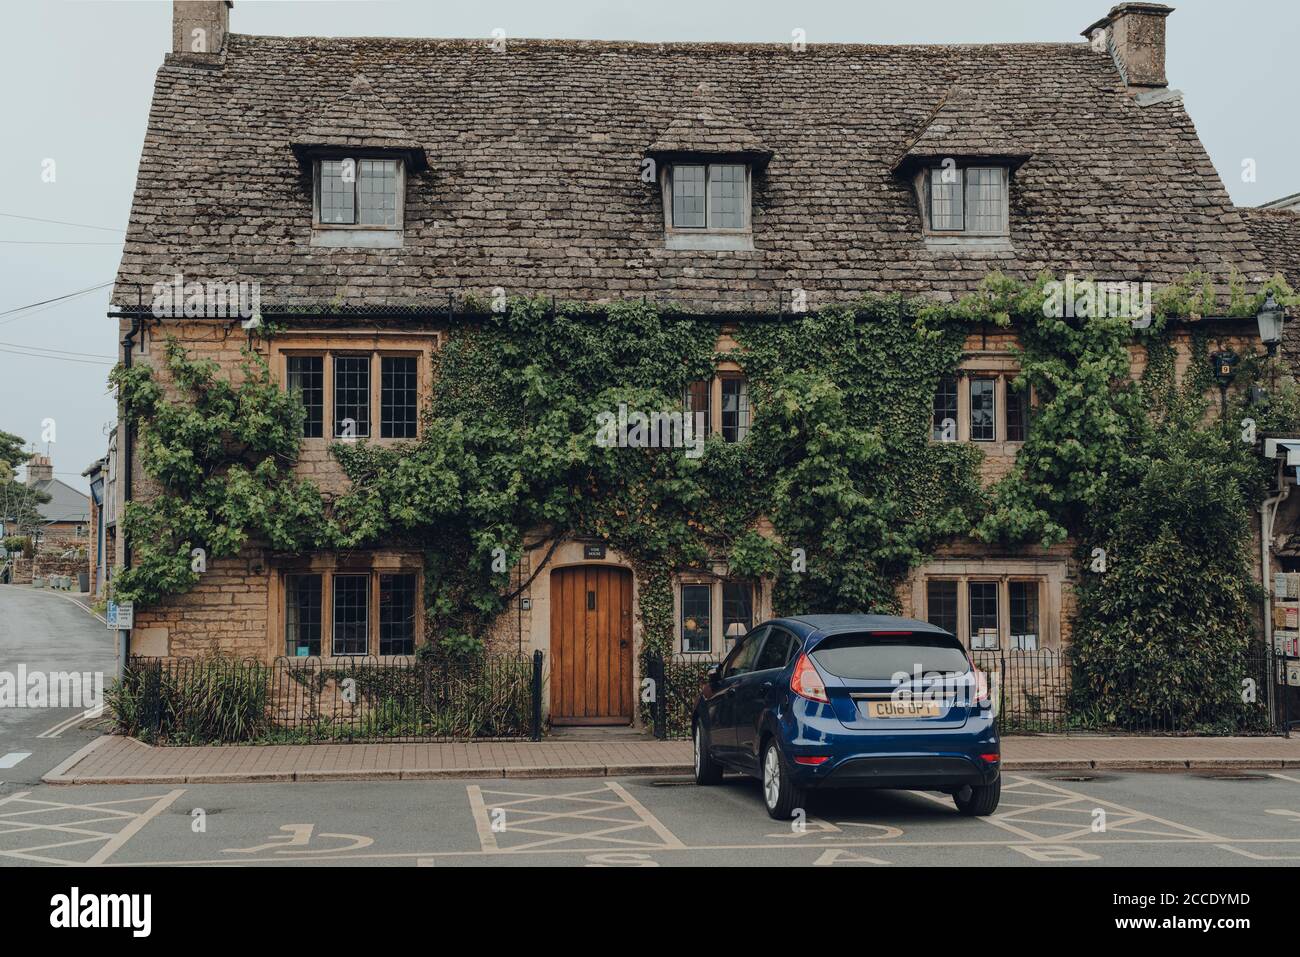 Bourton-on-the-Water, UK - July 10, 2020: A typical Cotswolds cottage home in Bourton-on-the-Water, a famous village in rural Cotswolds area of Englan Stock Photo